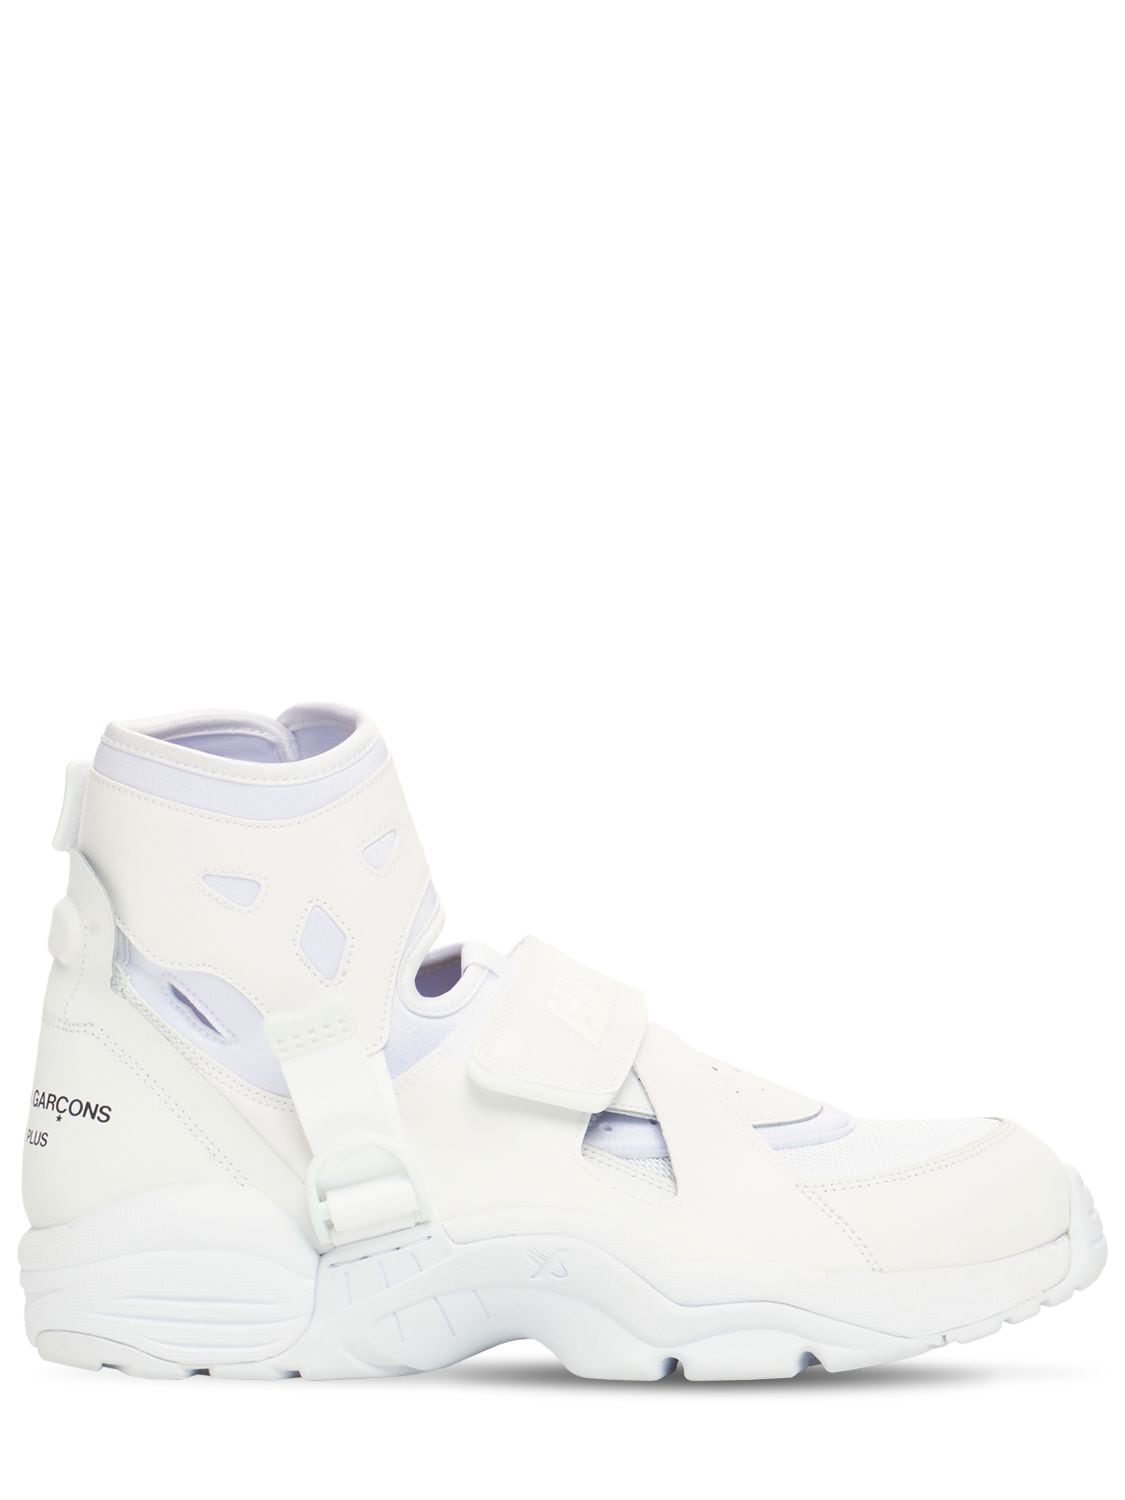 Comme Des Garçons Nike Carnivore Tech High Top Sneakers In White